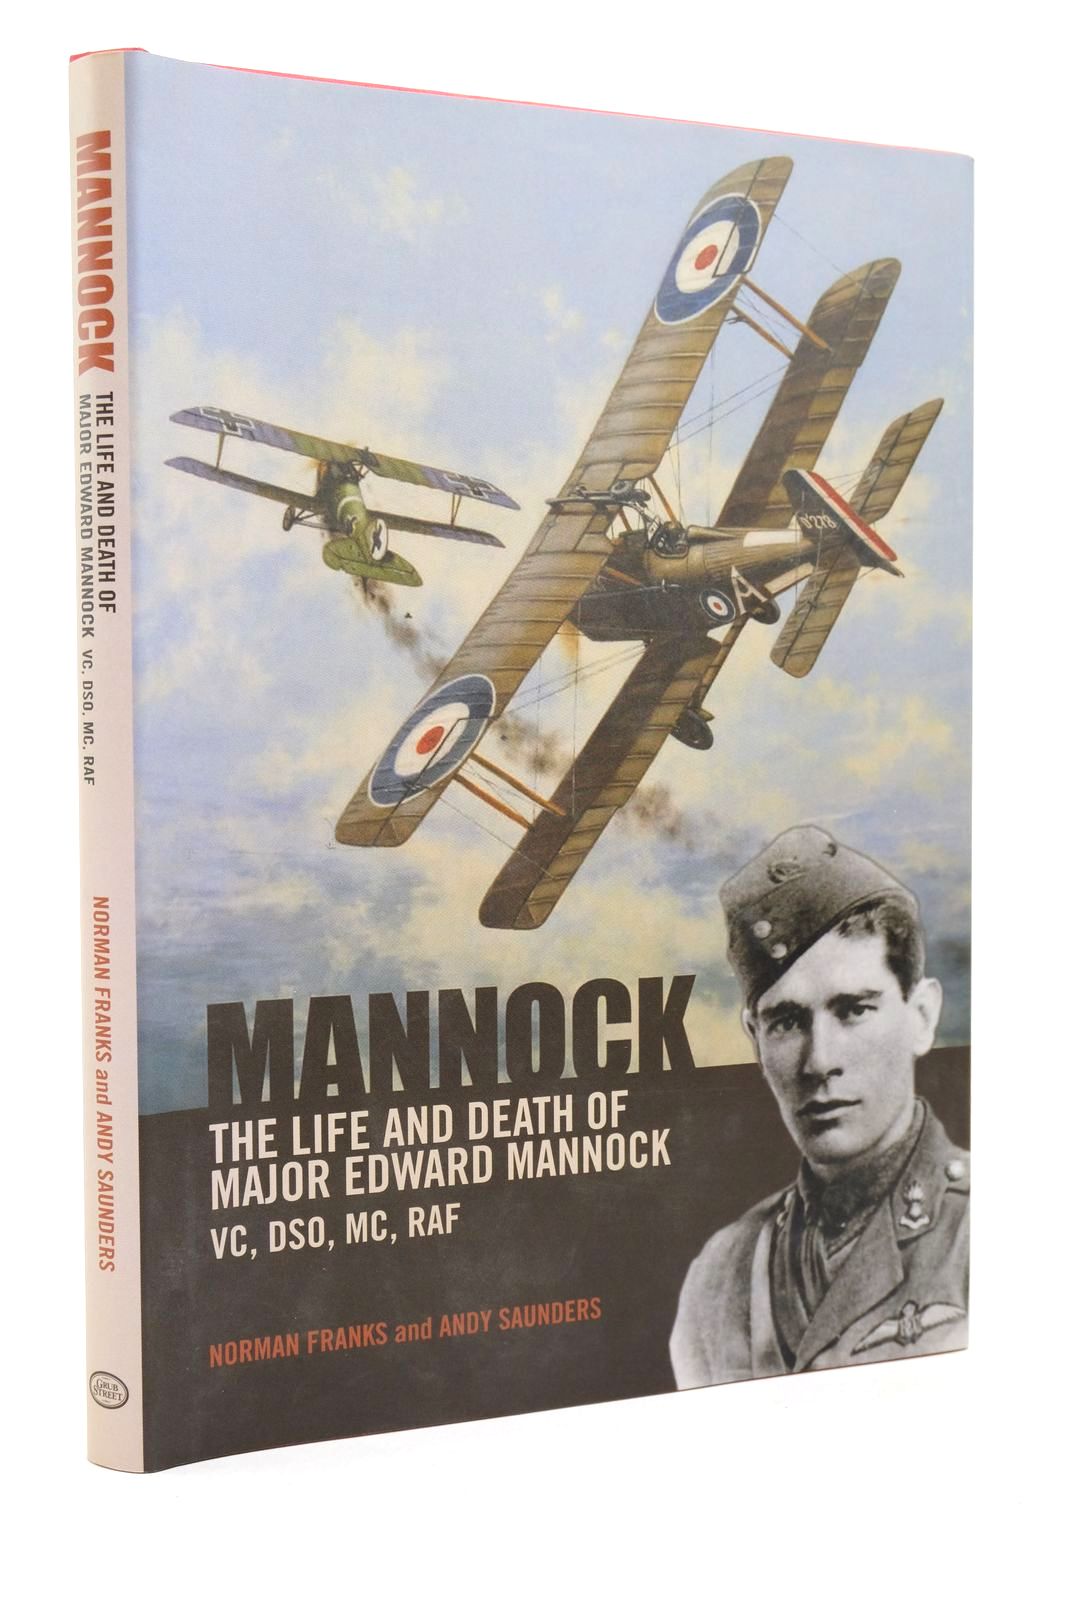 Photo of MANNOCK: THE LIFE AND DEATH OF MAJOR EDWARD MANNOCK VC DSO MC RAF- Stock Number: 2139819